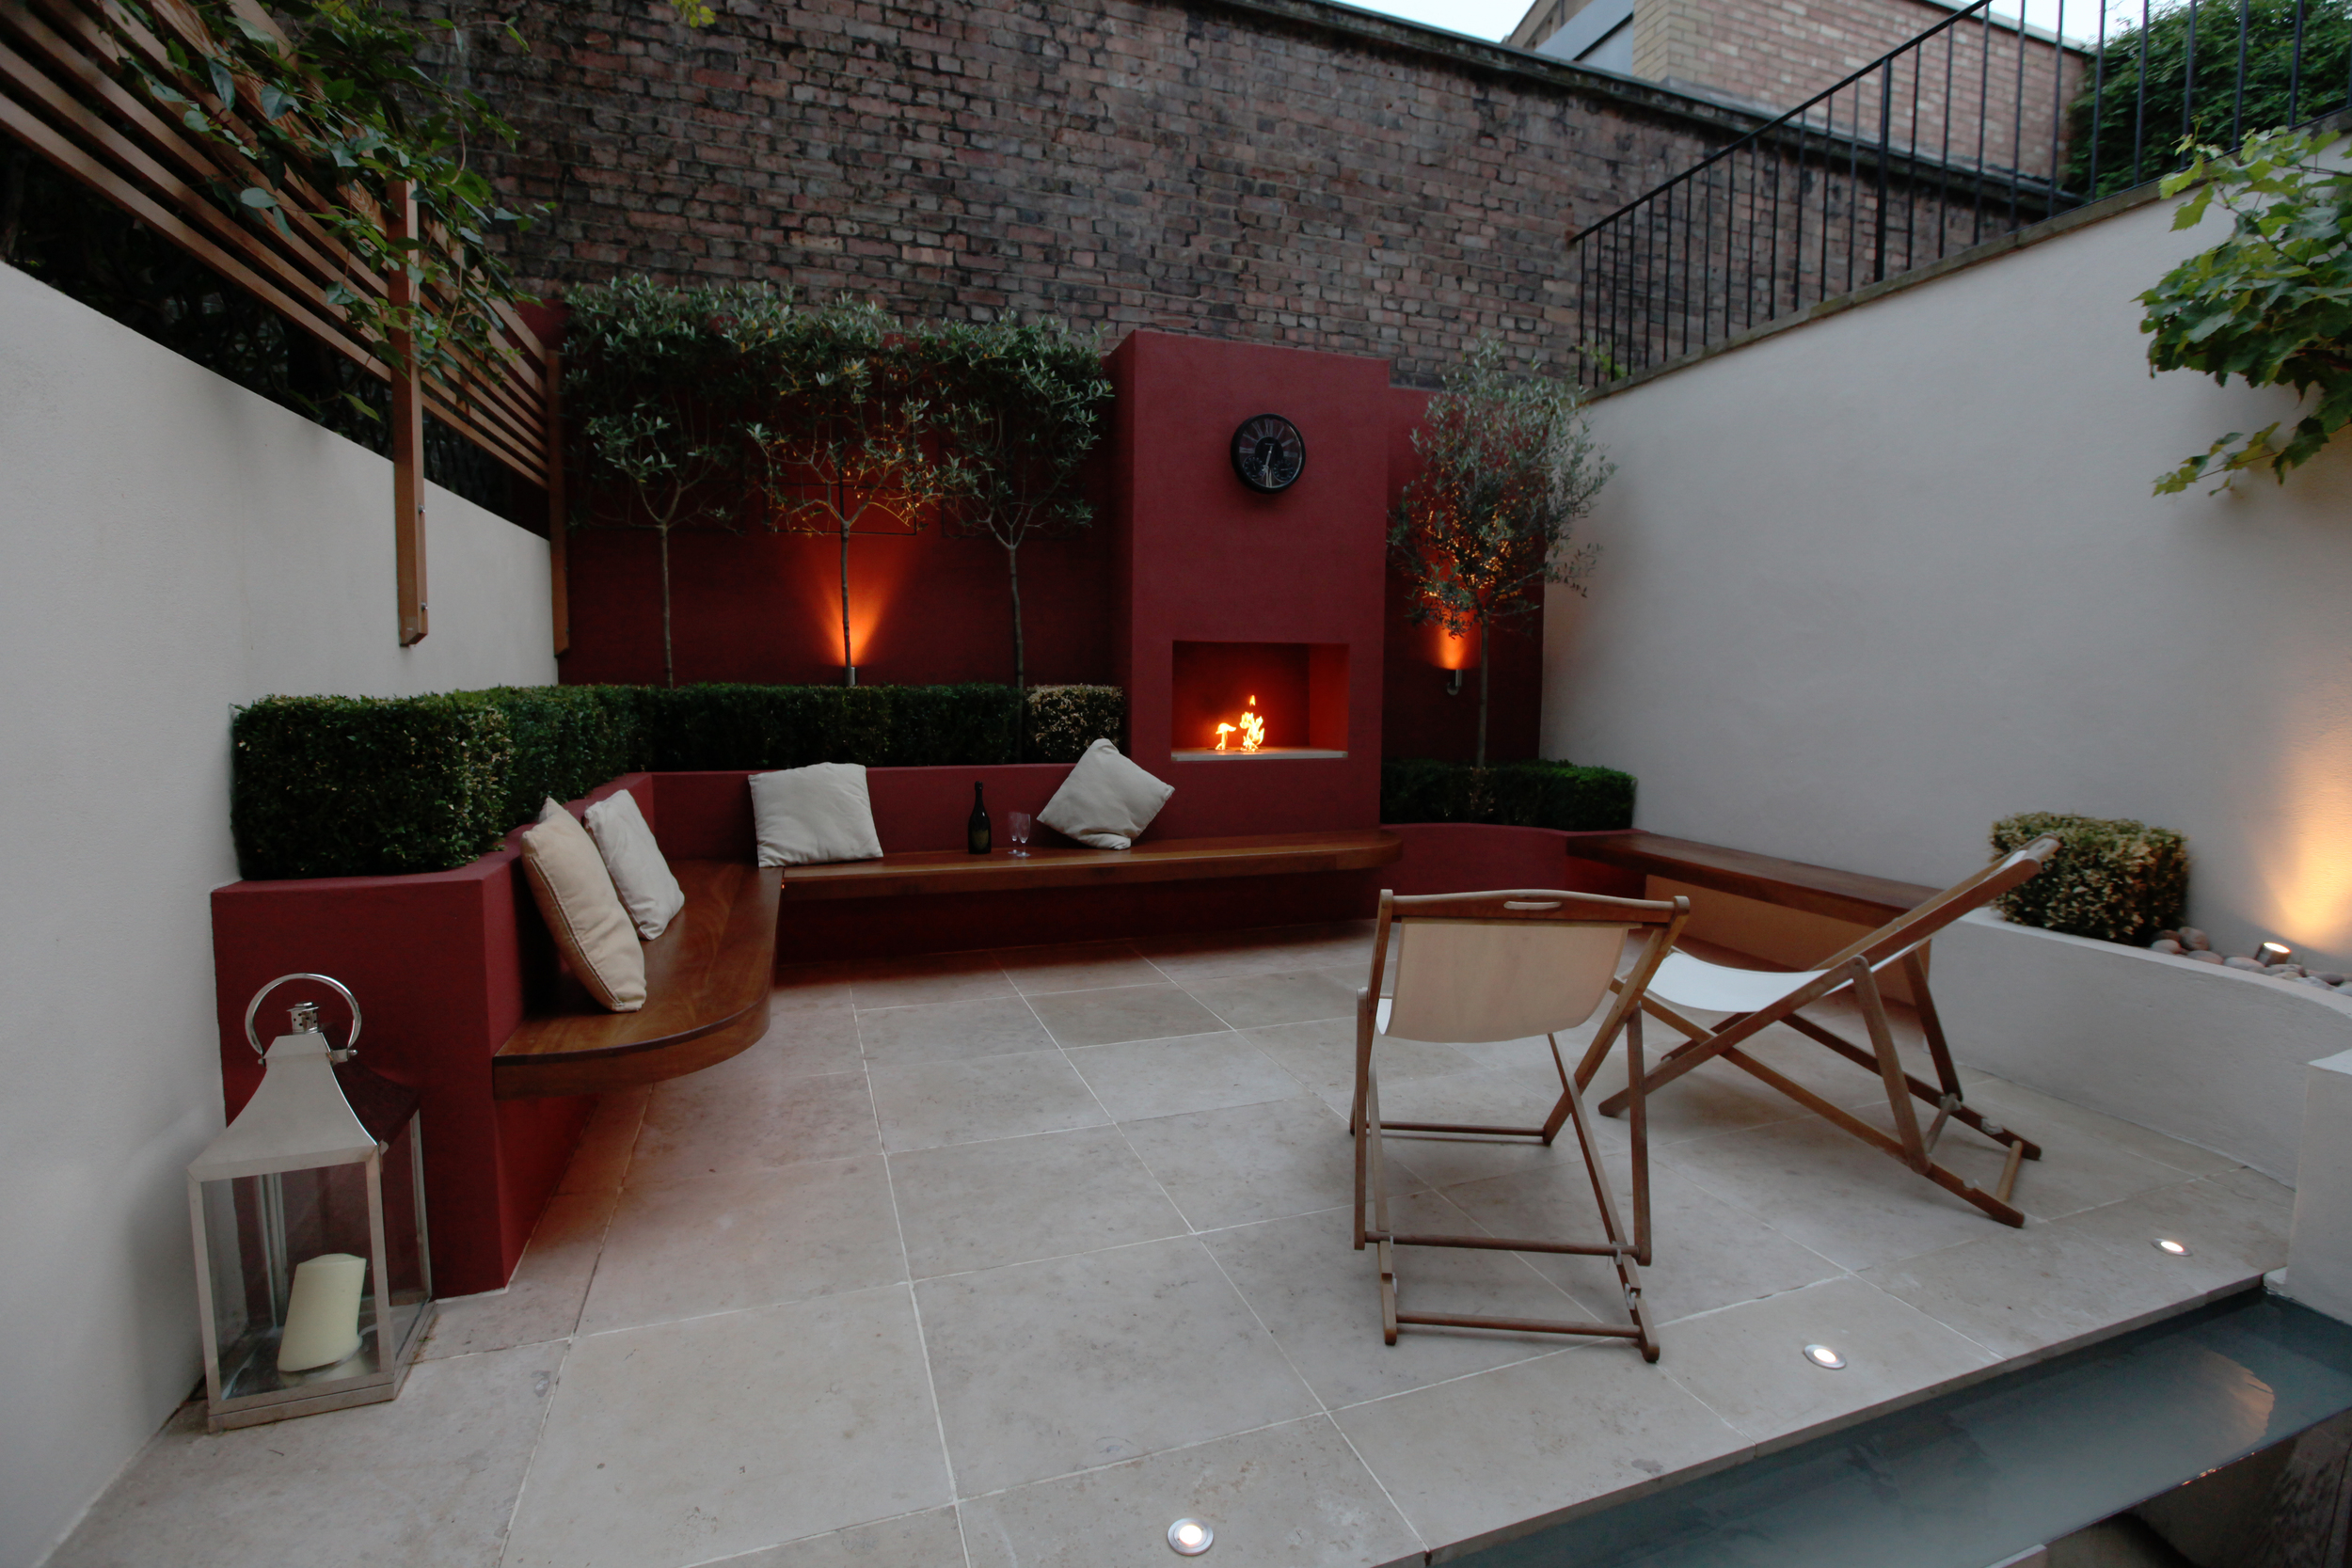 Courtyard garden makeover in N1 with outdoor living space